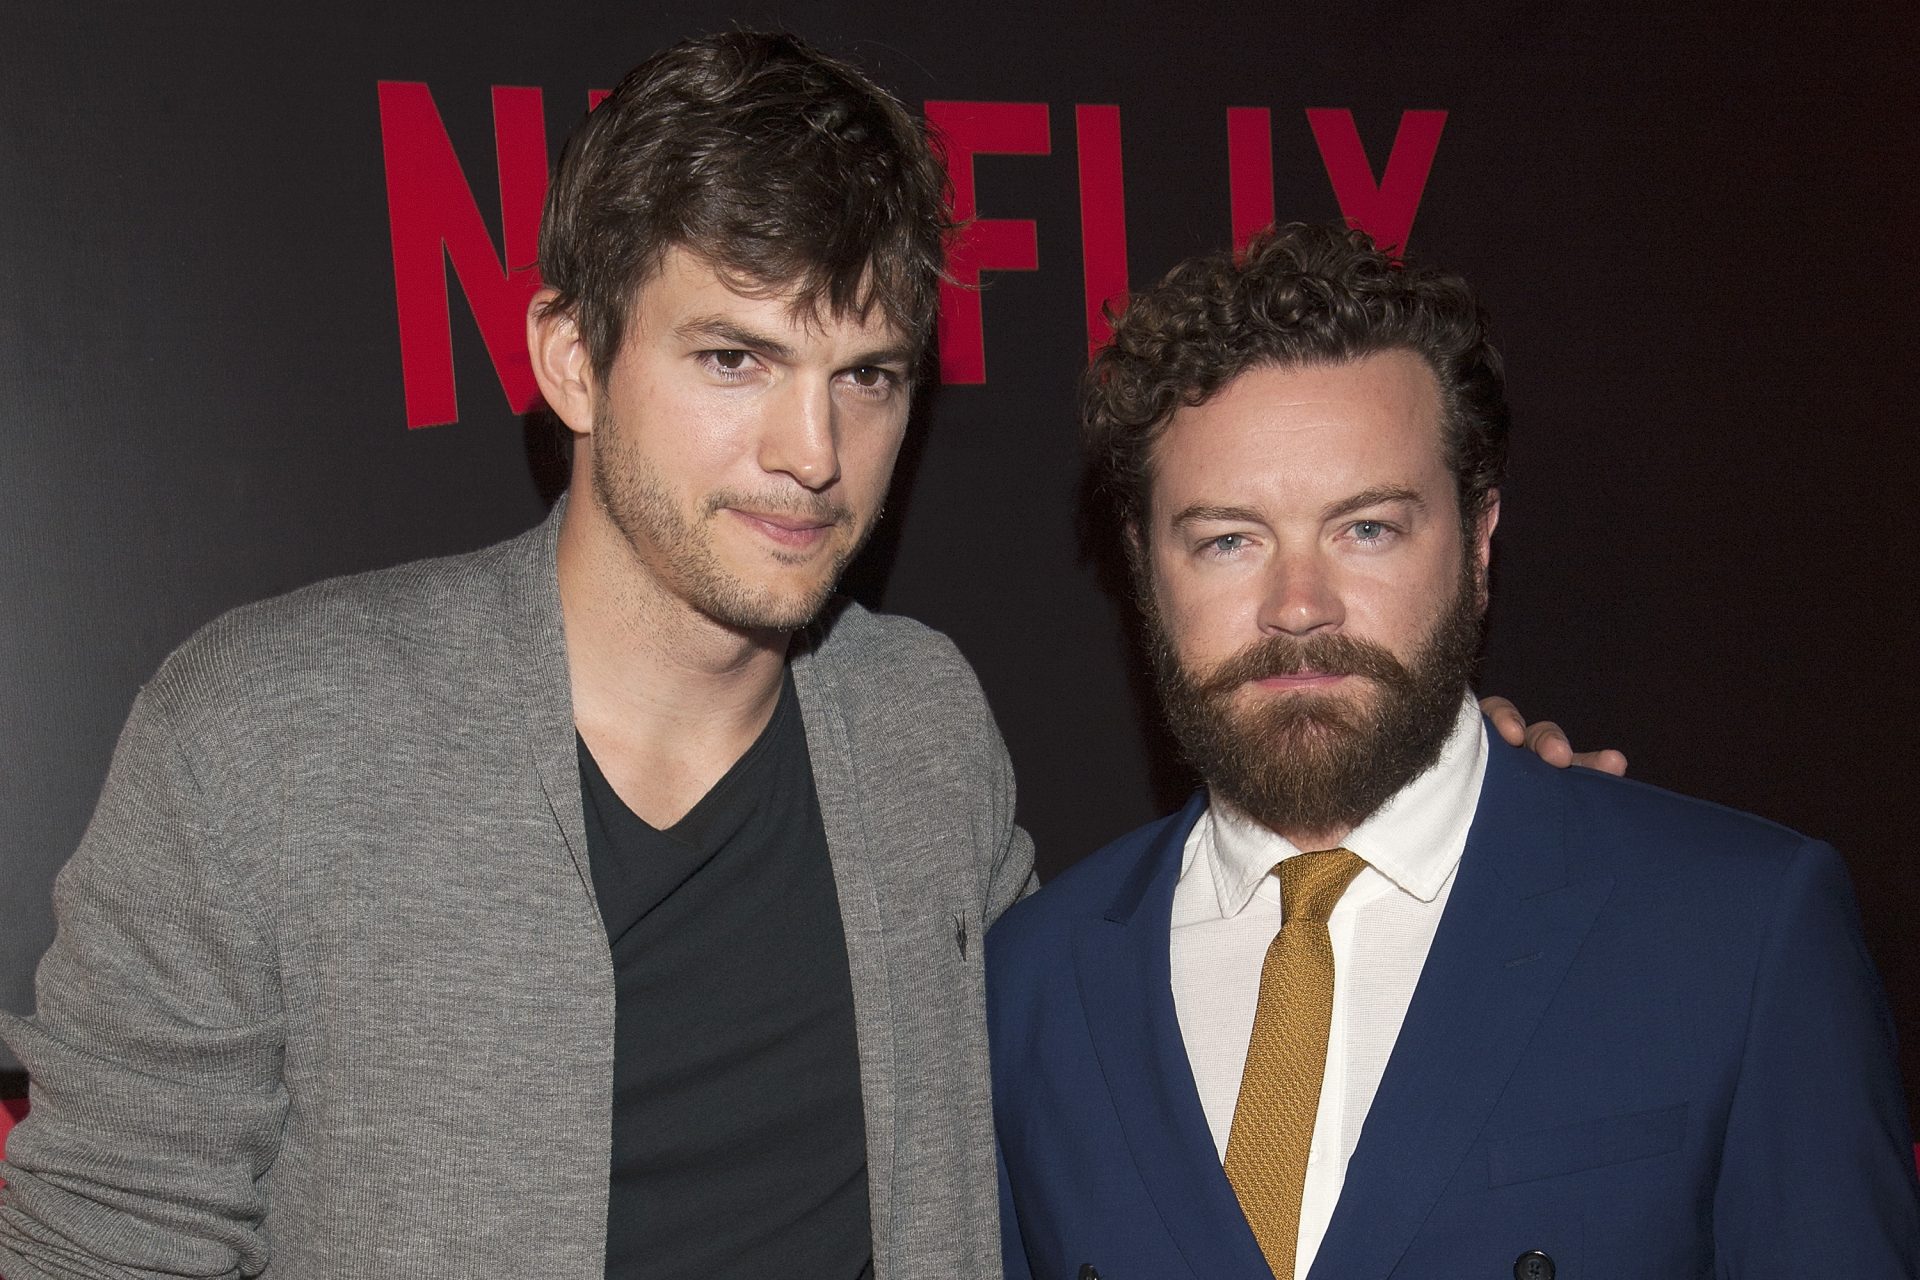 What's going on with the actors and actresses of That 70s Show?